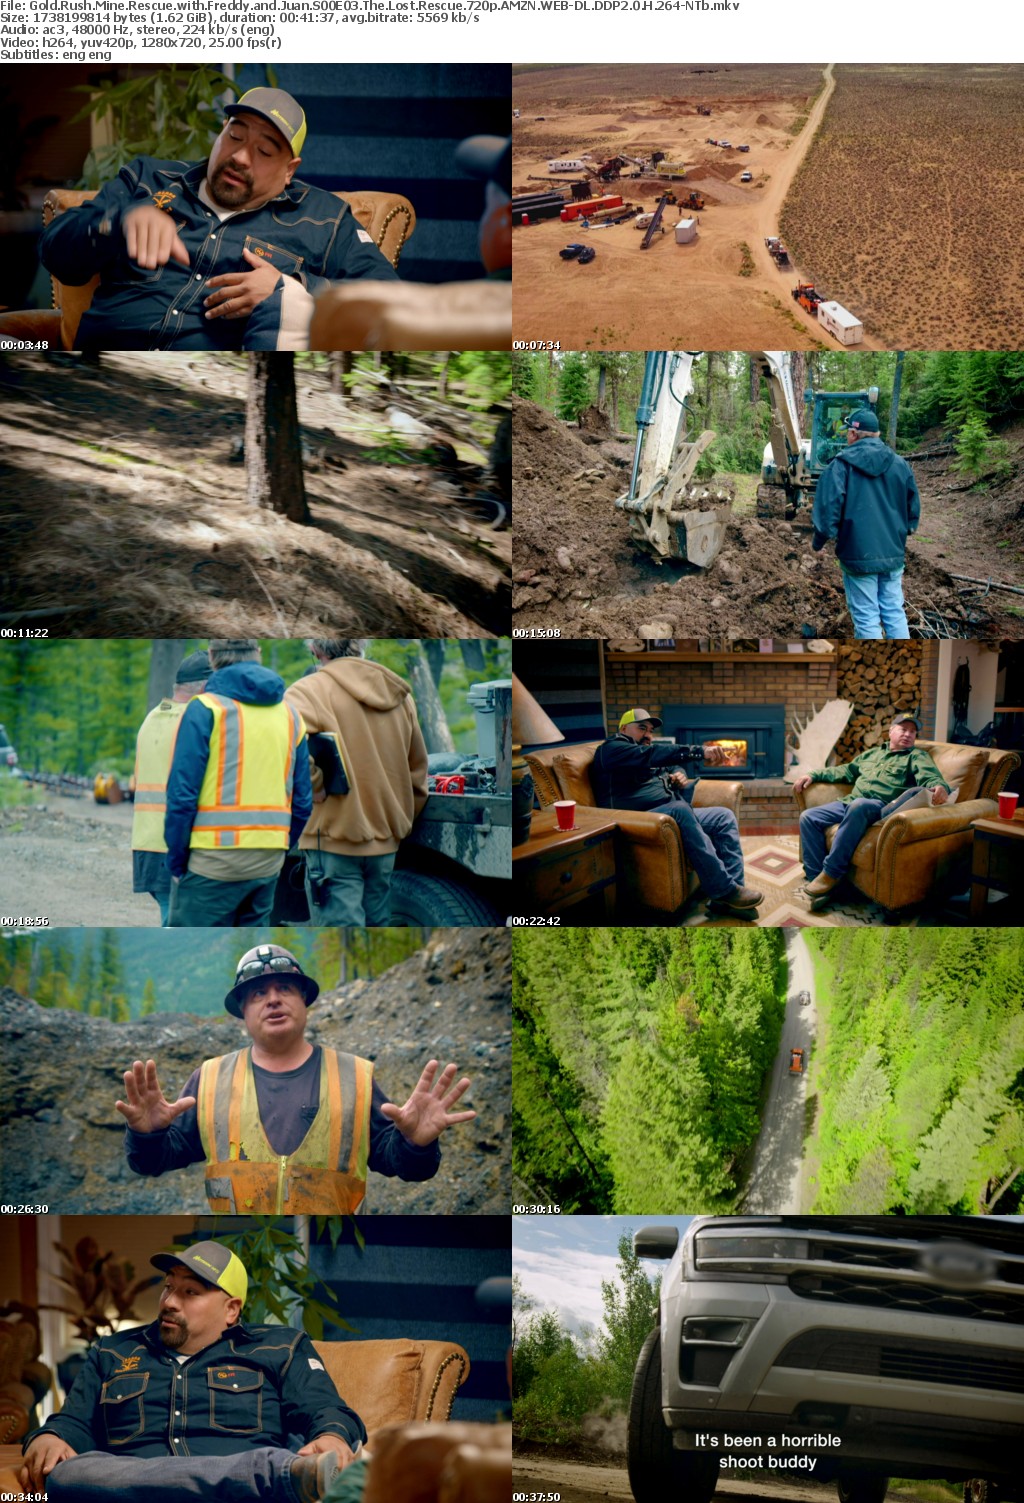 Gold Rush Mine Rescue with Freddy and Juan S00E03 The Lost Rescue 720p AMZN WEB-DL DDP2 0 H 264-NTb